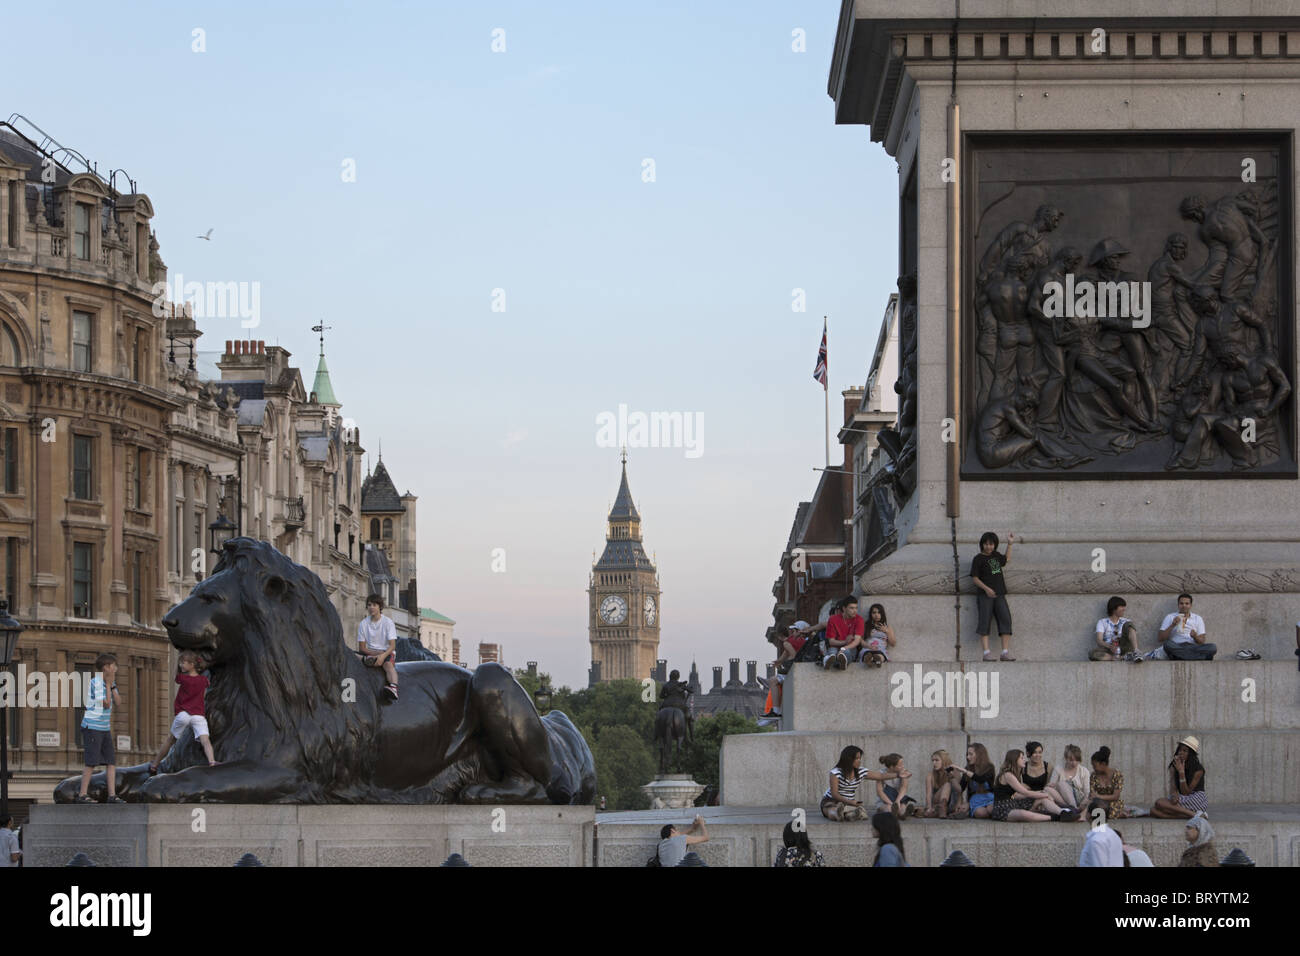 UK, ENGLAND, LONDON. Teenage tourist sitting at the base of Nelson's Column in Trafalgar Square. Big Ben clock tower in distance Stock Photo